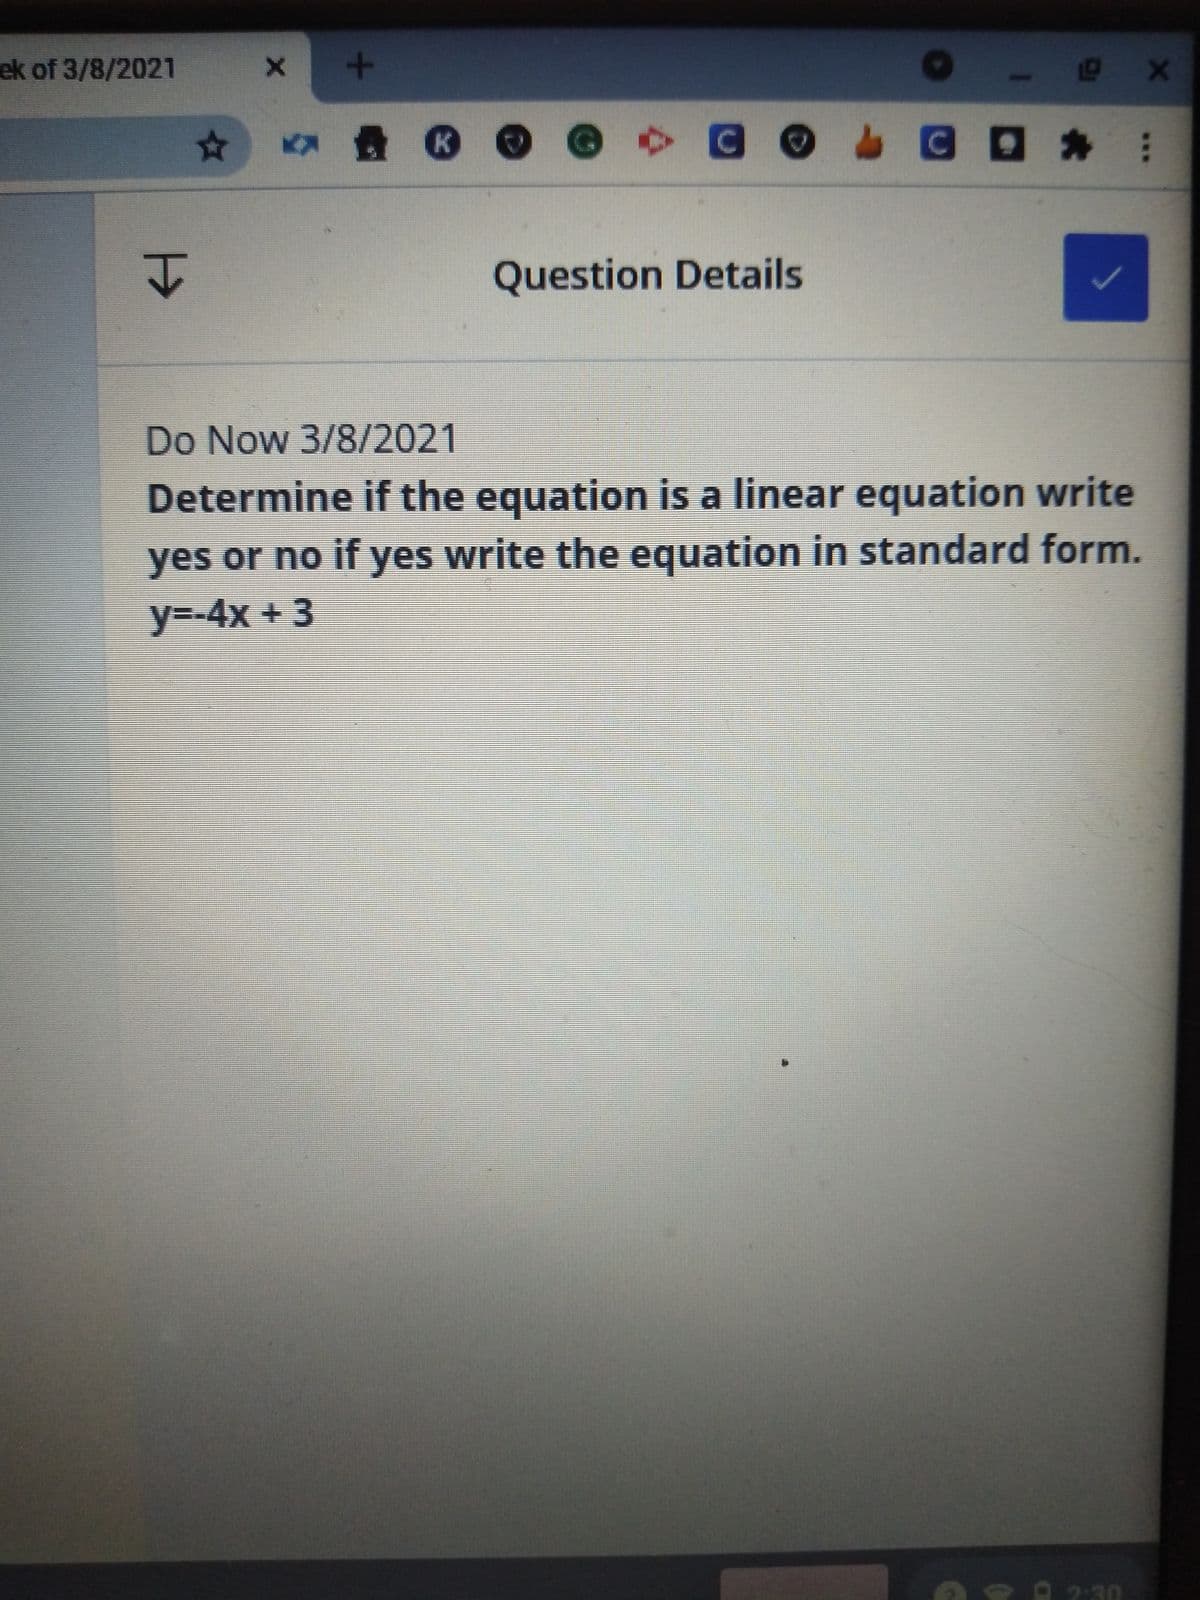 ek of 3/8/2021
Question Details
Do Now 3/8/2021
Determine if the equation is a linear equation write
yes or no if yes write the equation in standard form.
y%=D4x + 3
O9 A 2:30
